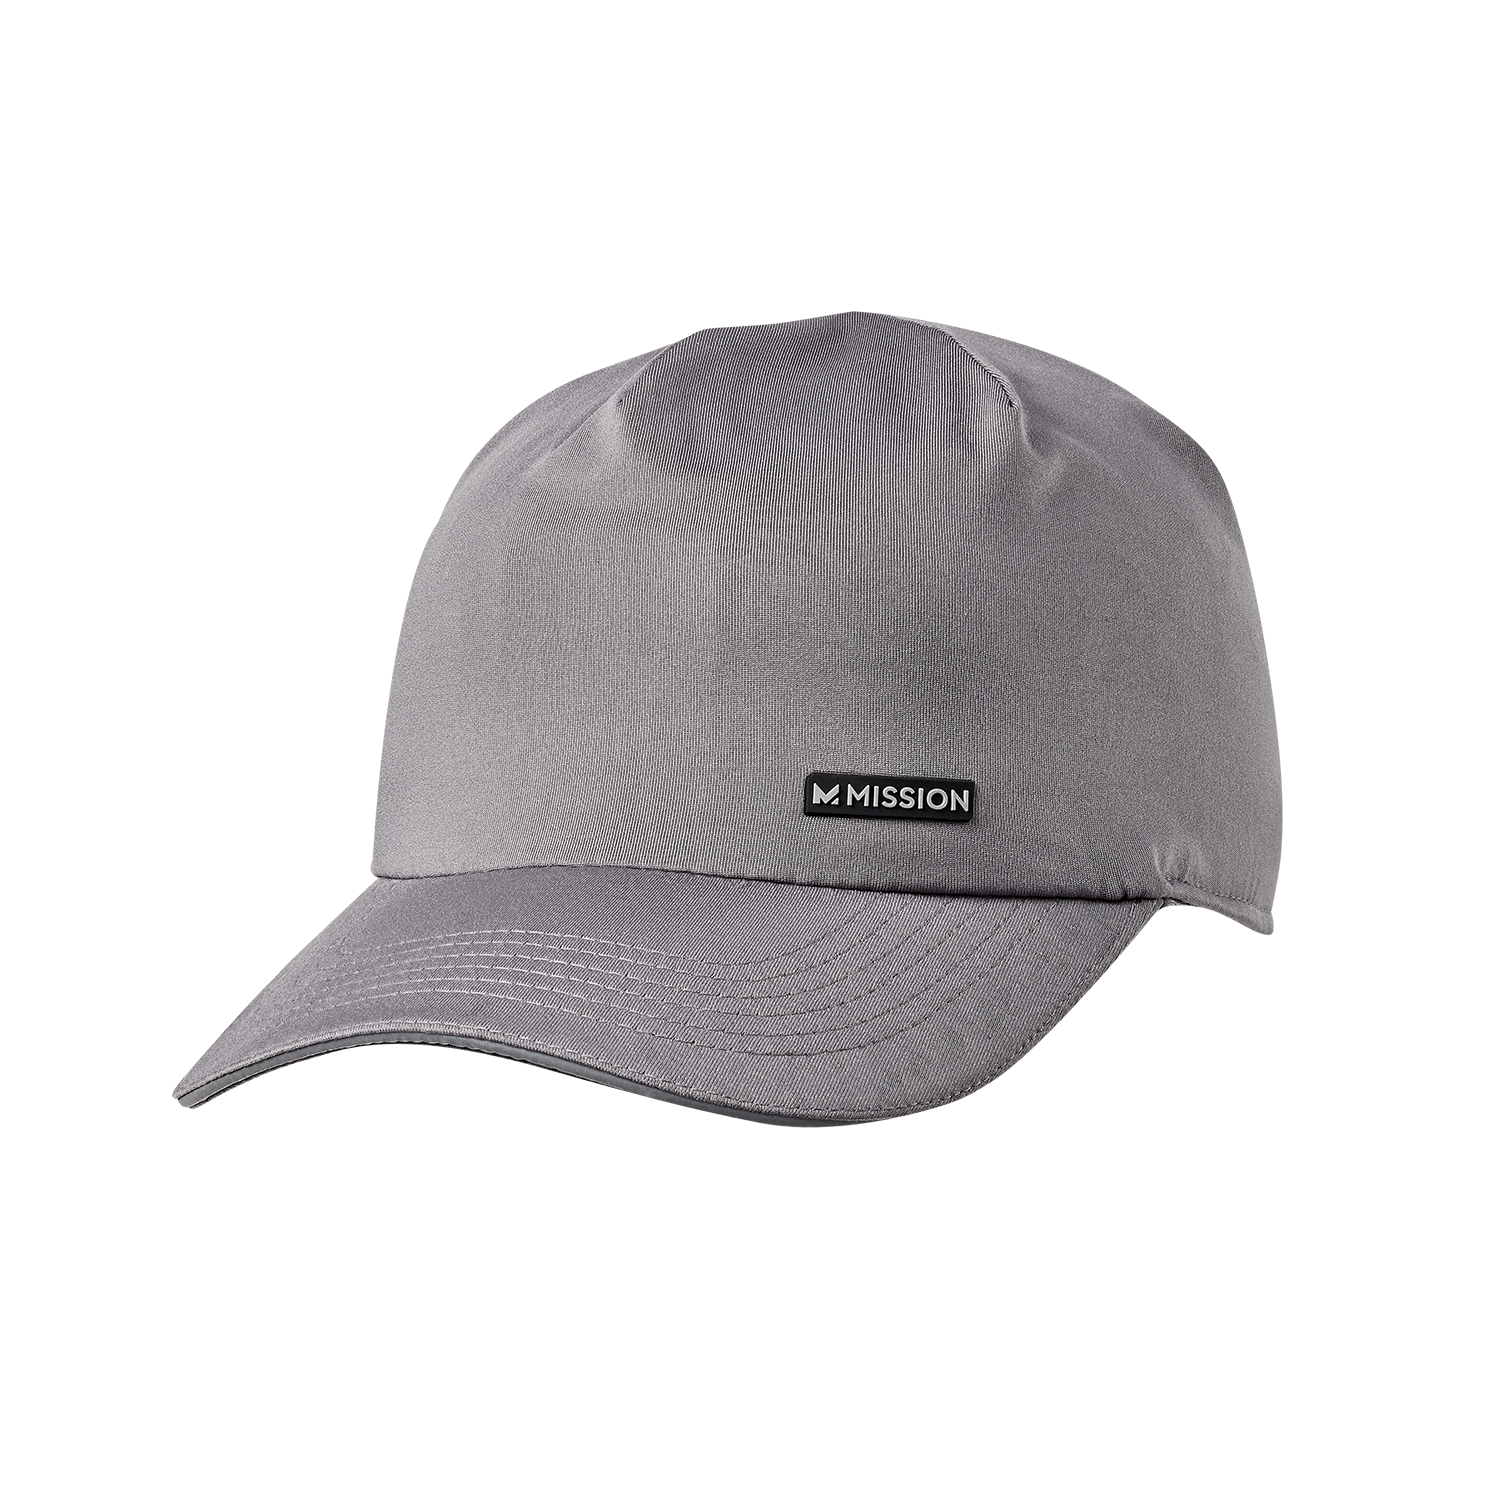 Cooling Sprint Hat Caps MISSION One Size Charcoal 